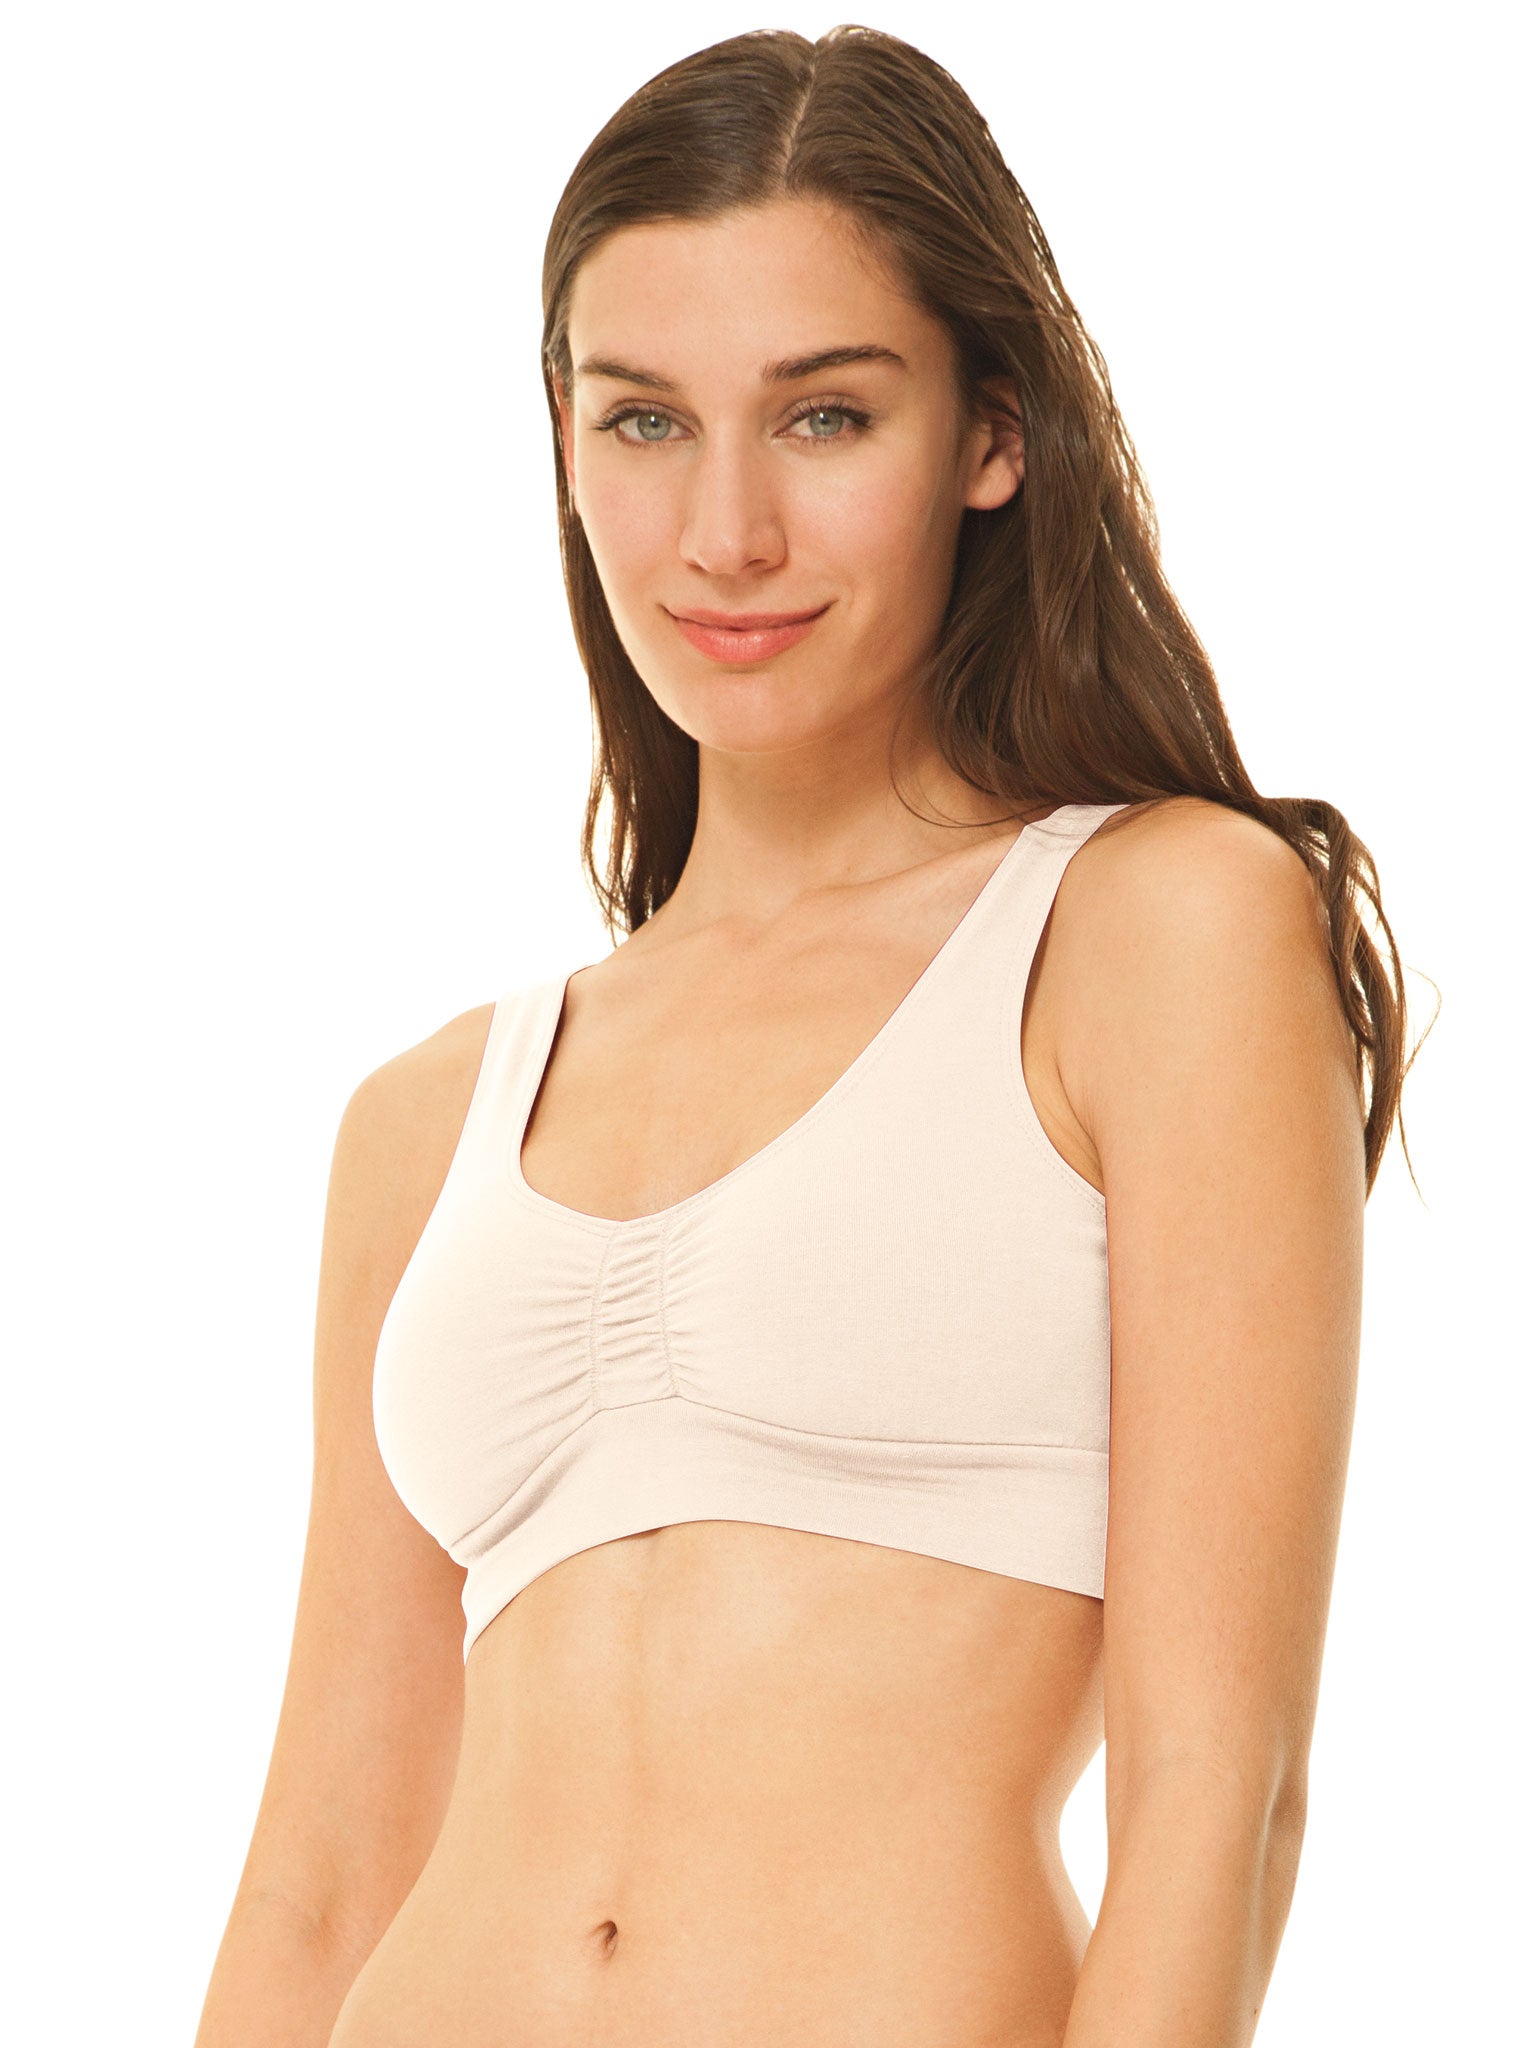 Cotton Bras vs. Synthetic Bras: Why Natural Fibres Reign Supreme? -  Teenager Bra